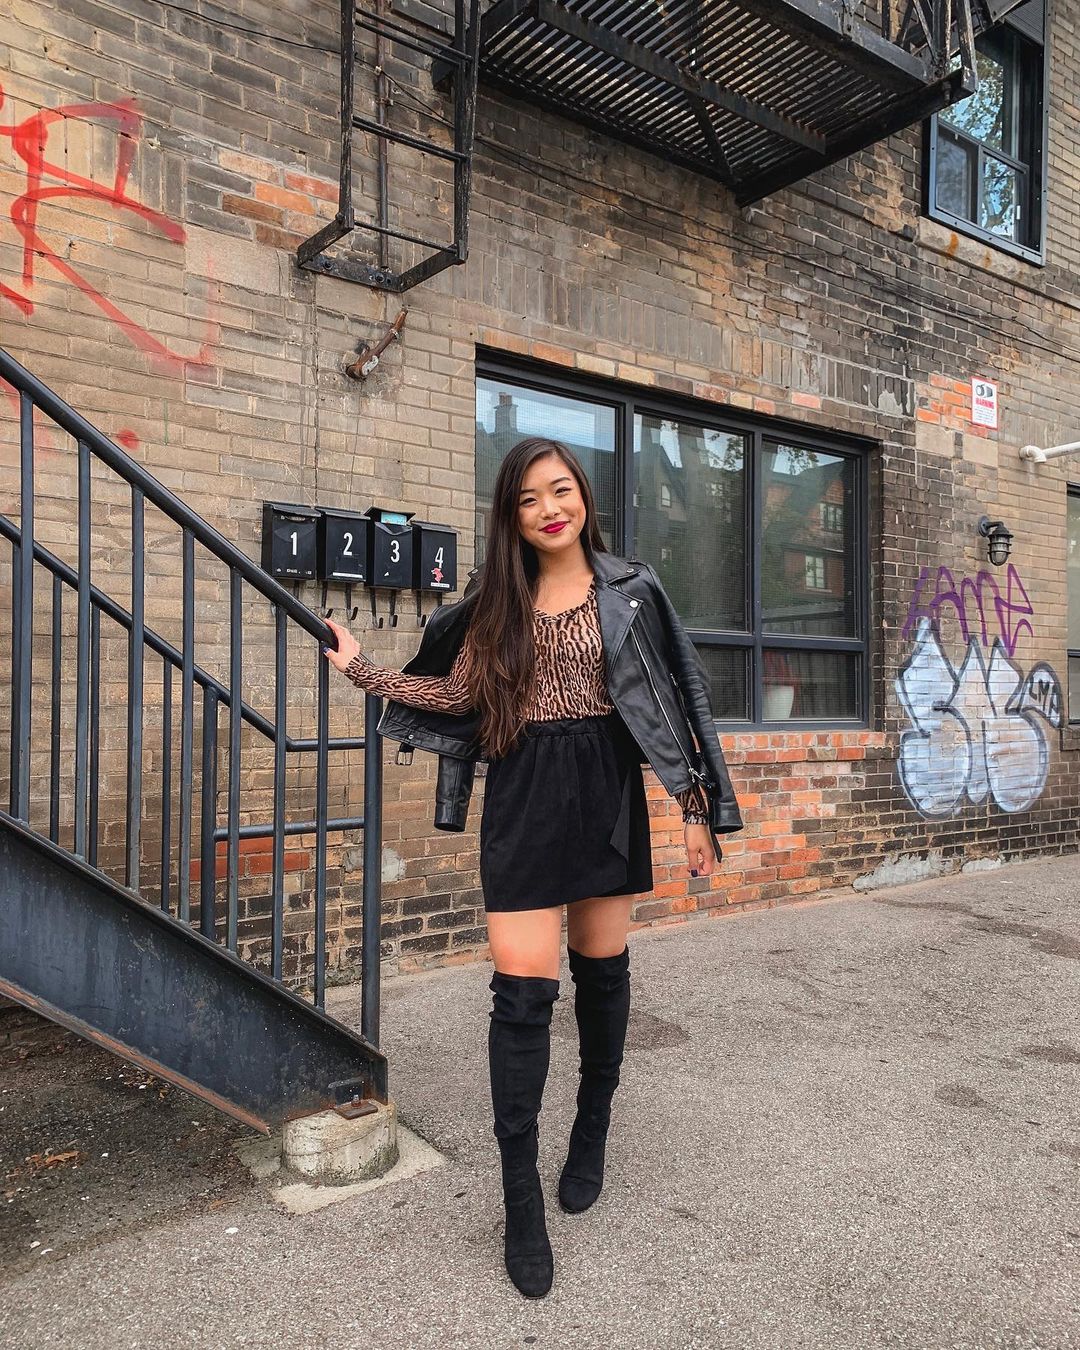 Casual fall outfit featuring leather moto jacket, leopard long sleeve top, black suede miniskirt, over-the-knee boots in Little Italy, Toronto